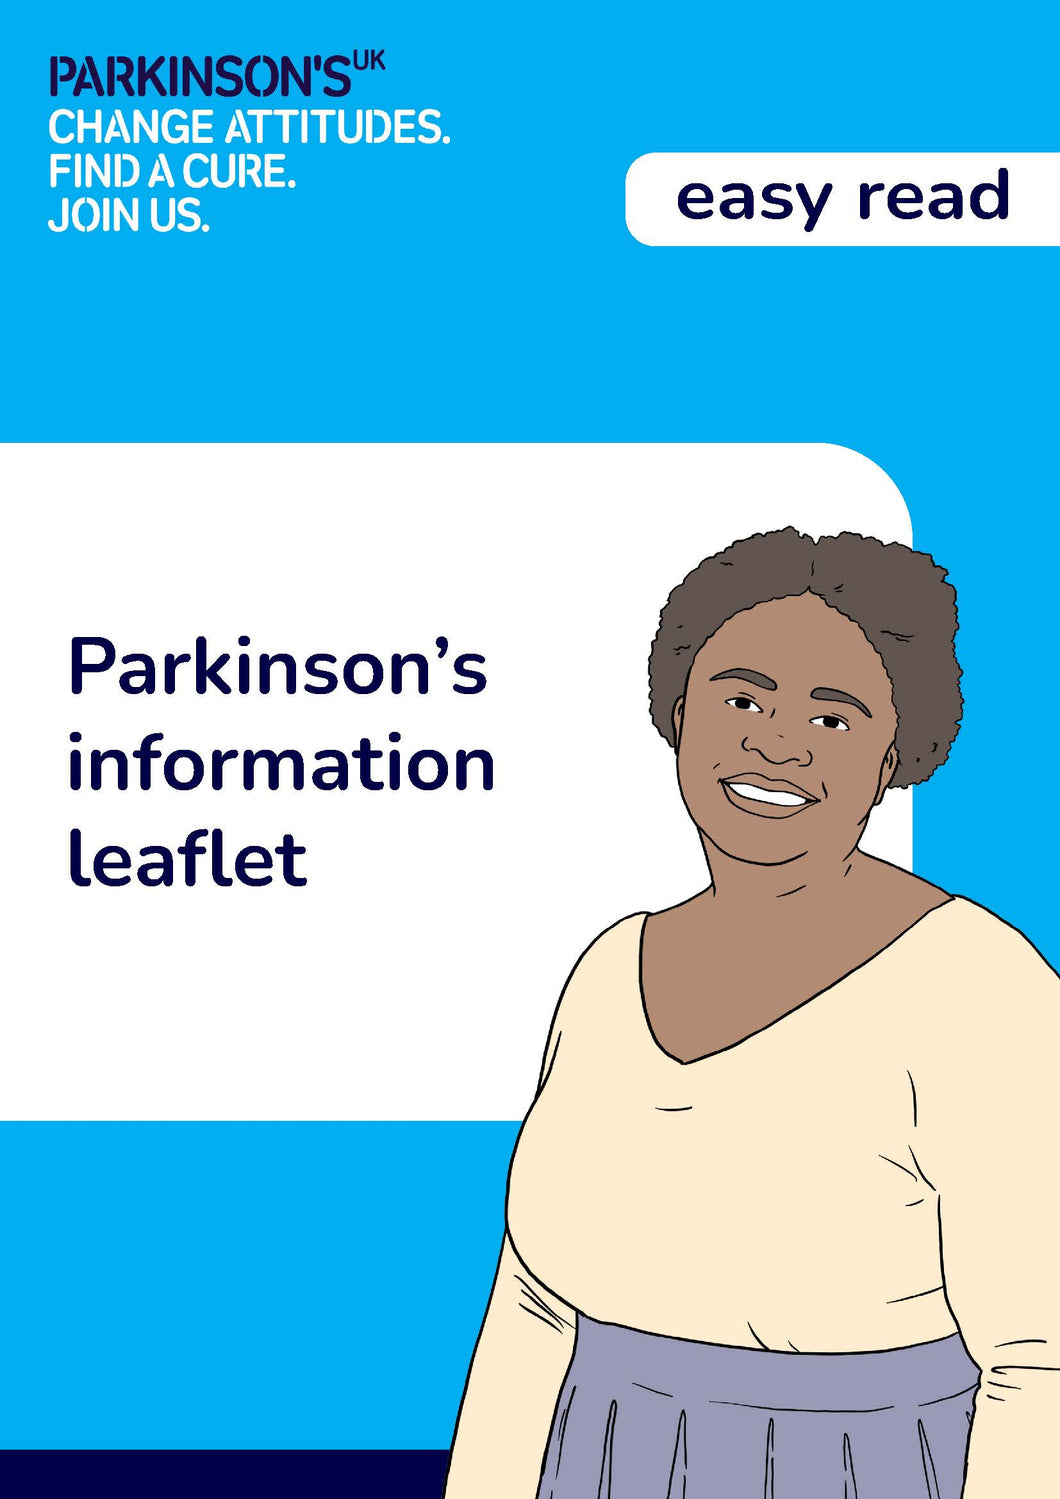 Easy read information about Parkinson’s